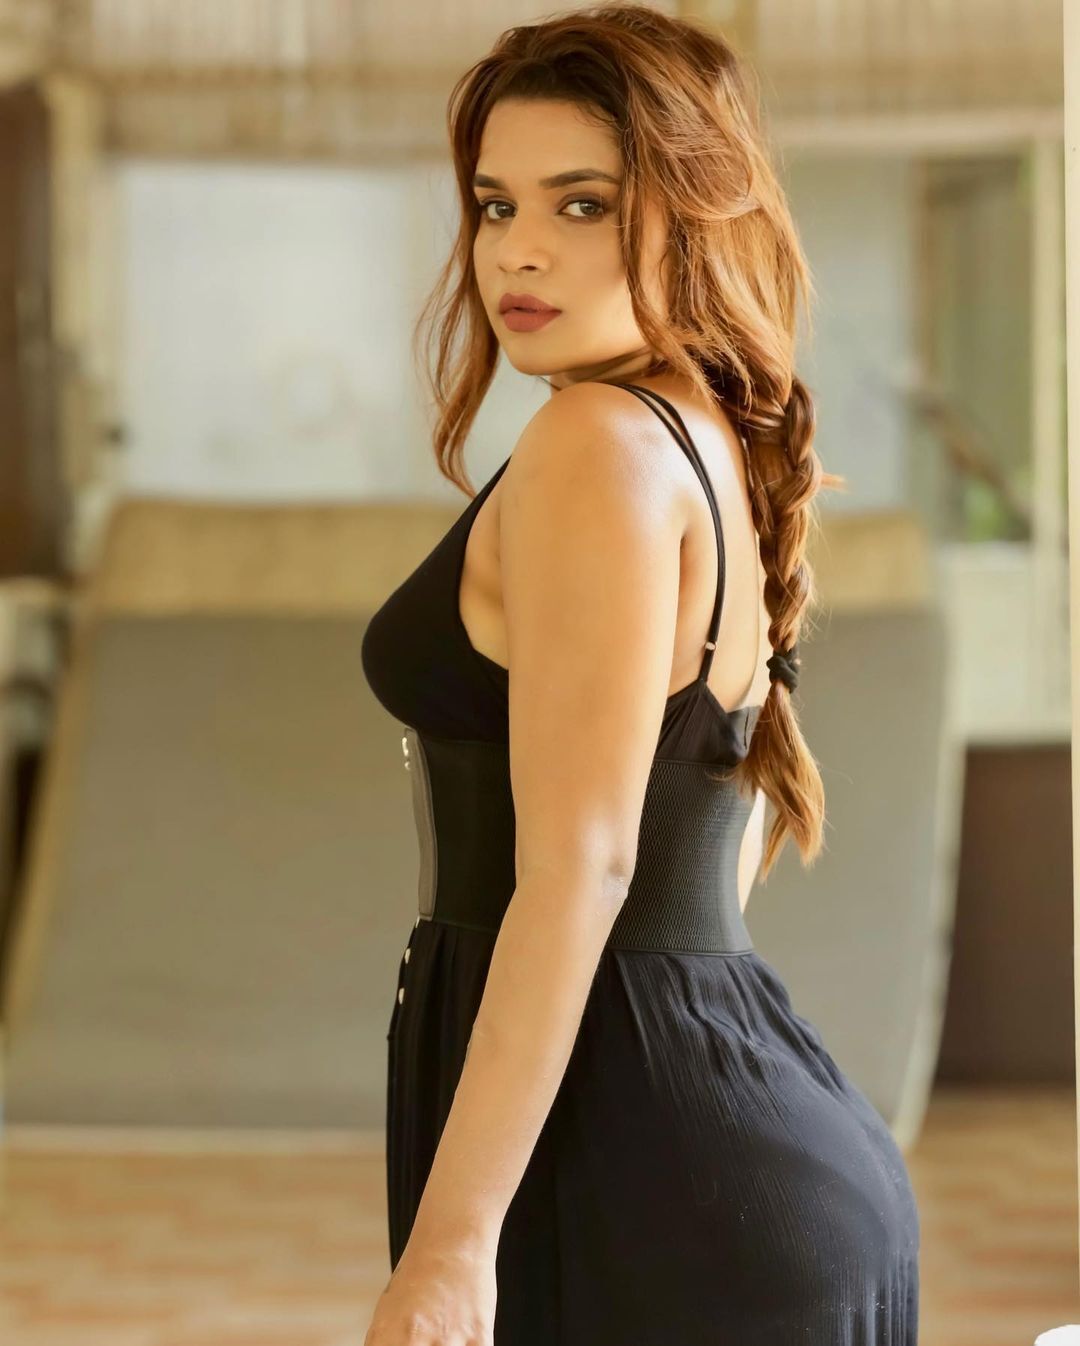 Veena Jessi is an Indian model and actress based in Chennai.